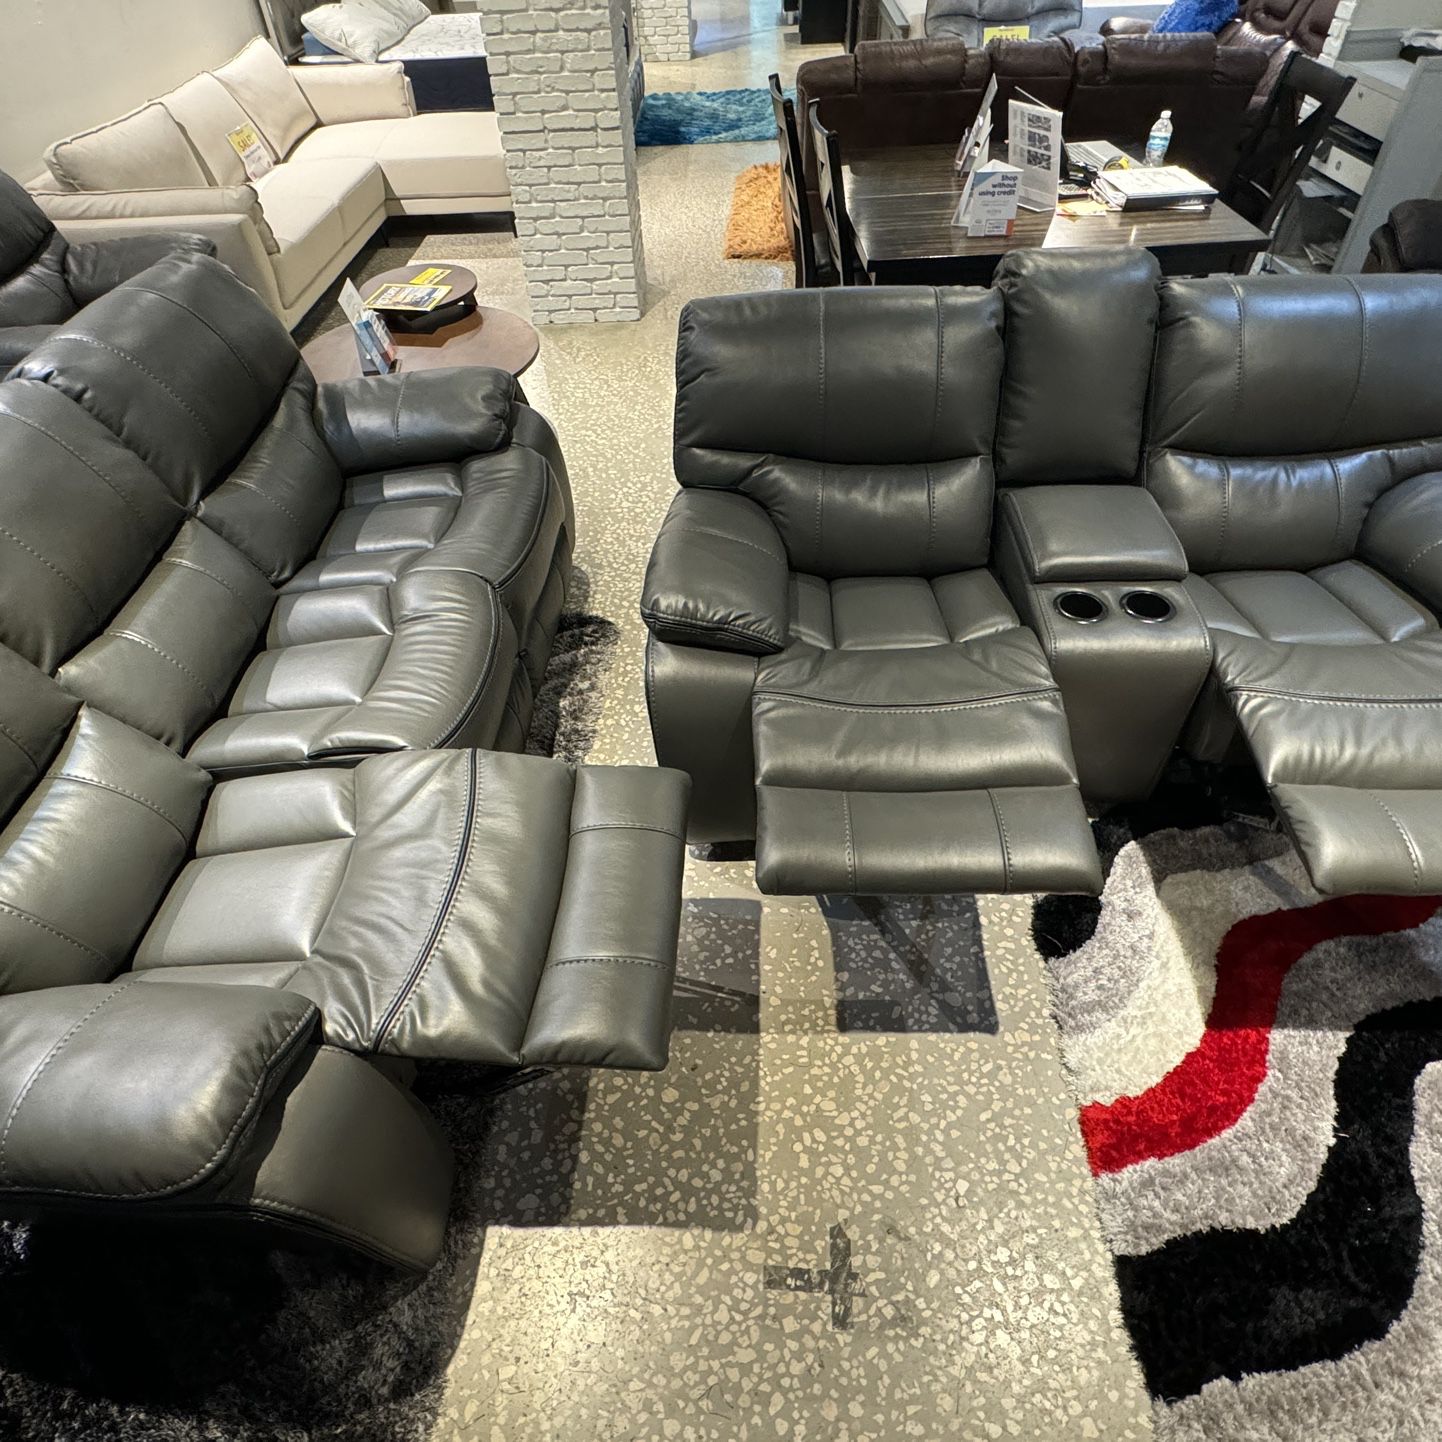 BEAUTIFUL GRAY MADRID SOFA AND LOVESEAT!$899!*SAME DAY DELIVERY*NO CREDIT NEEDED*EASY FINANCING*HUGE SALE*